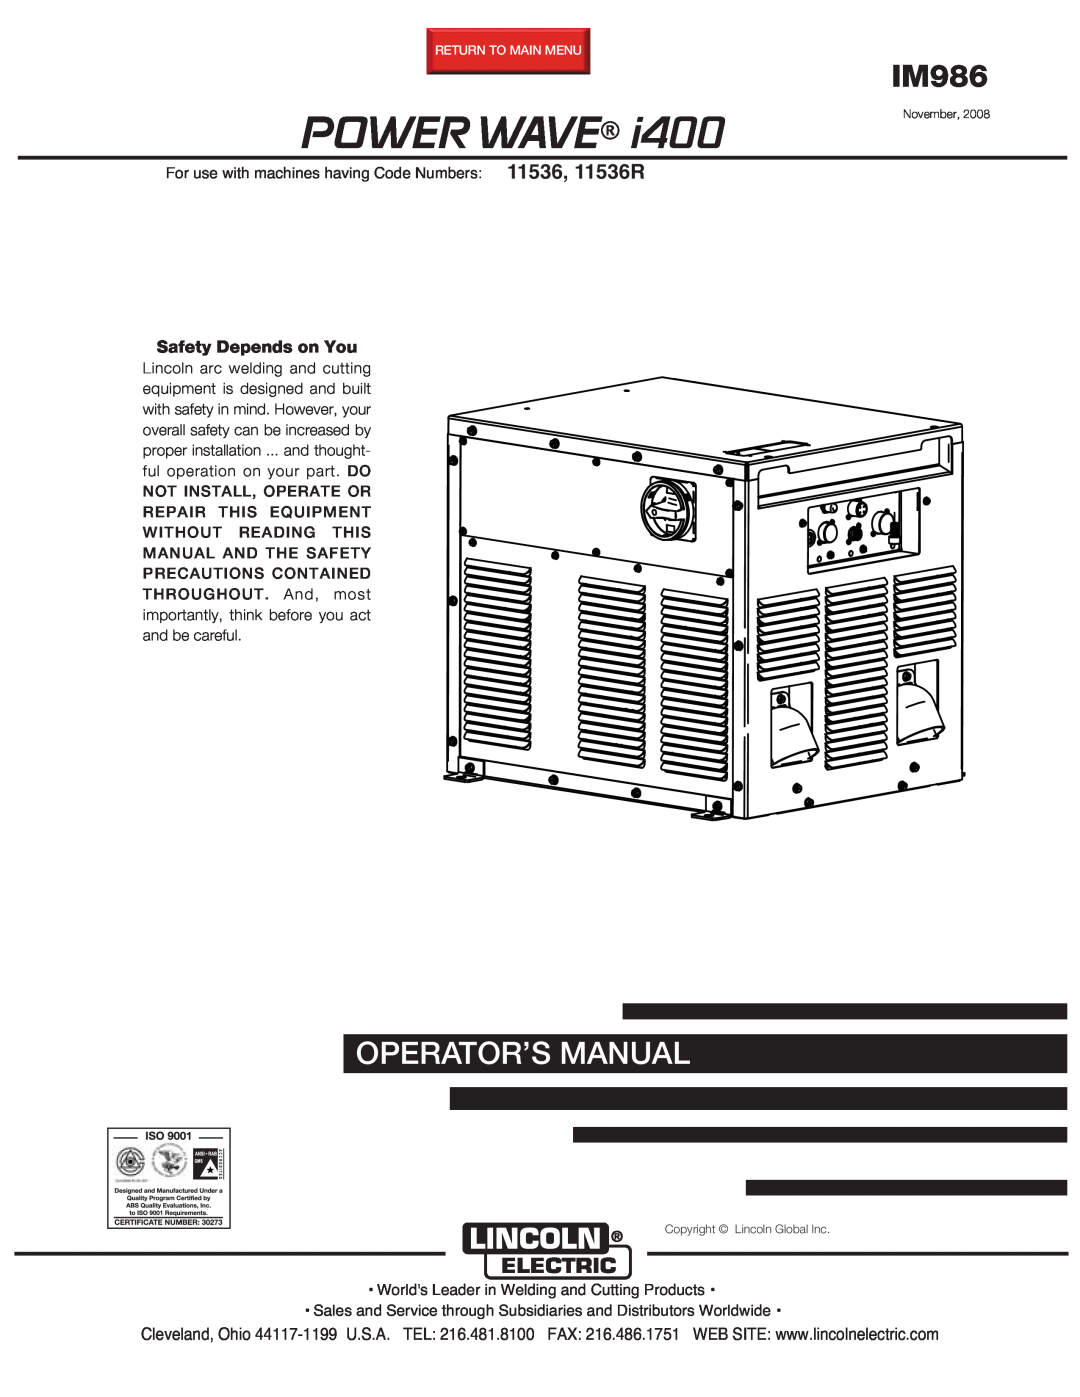 Lincoln Electric IM986 manual Power Wave, Operator’S Manual 